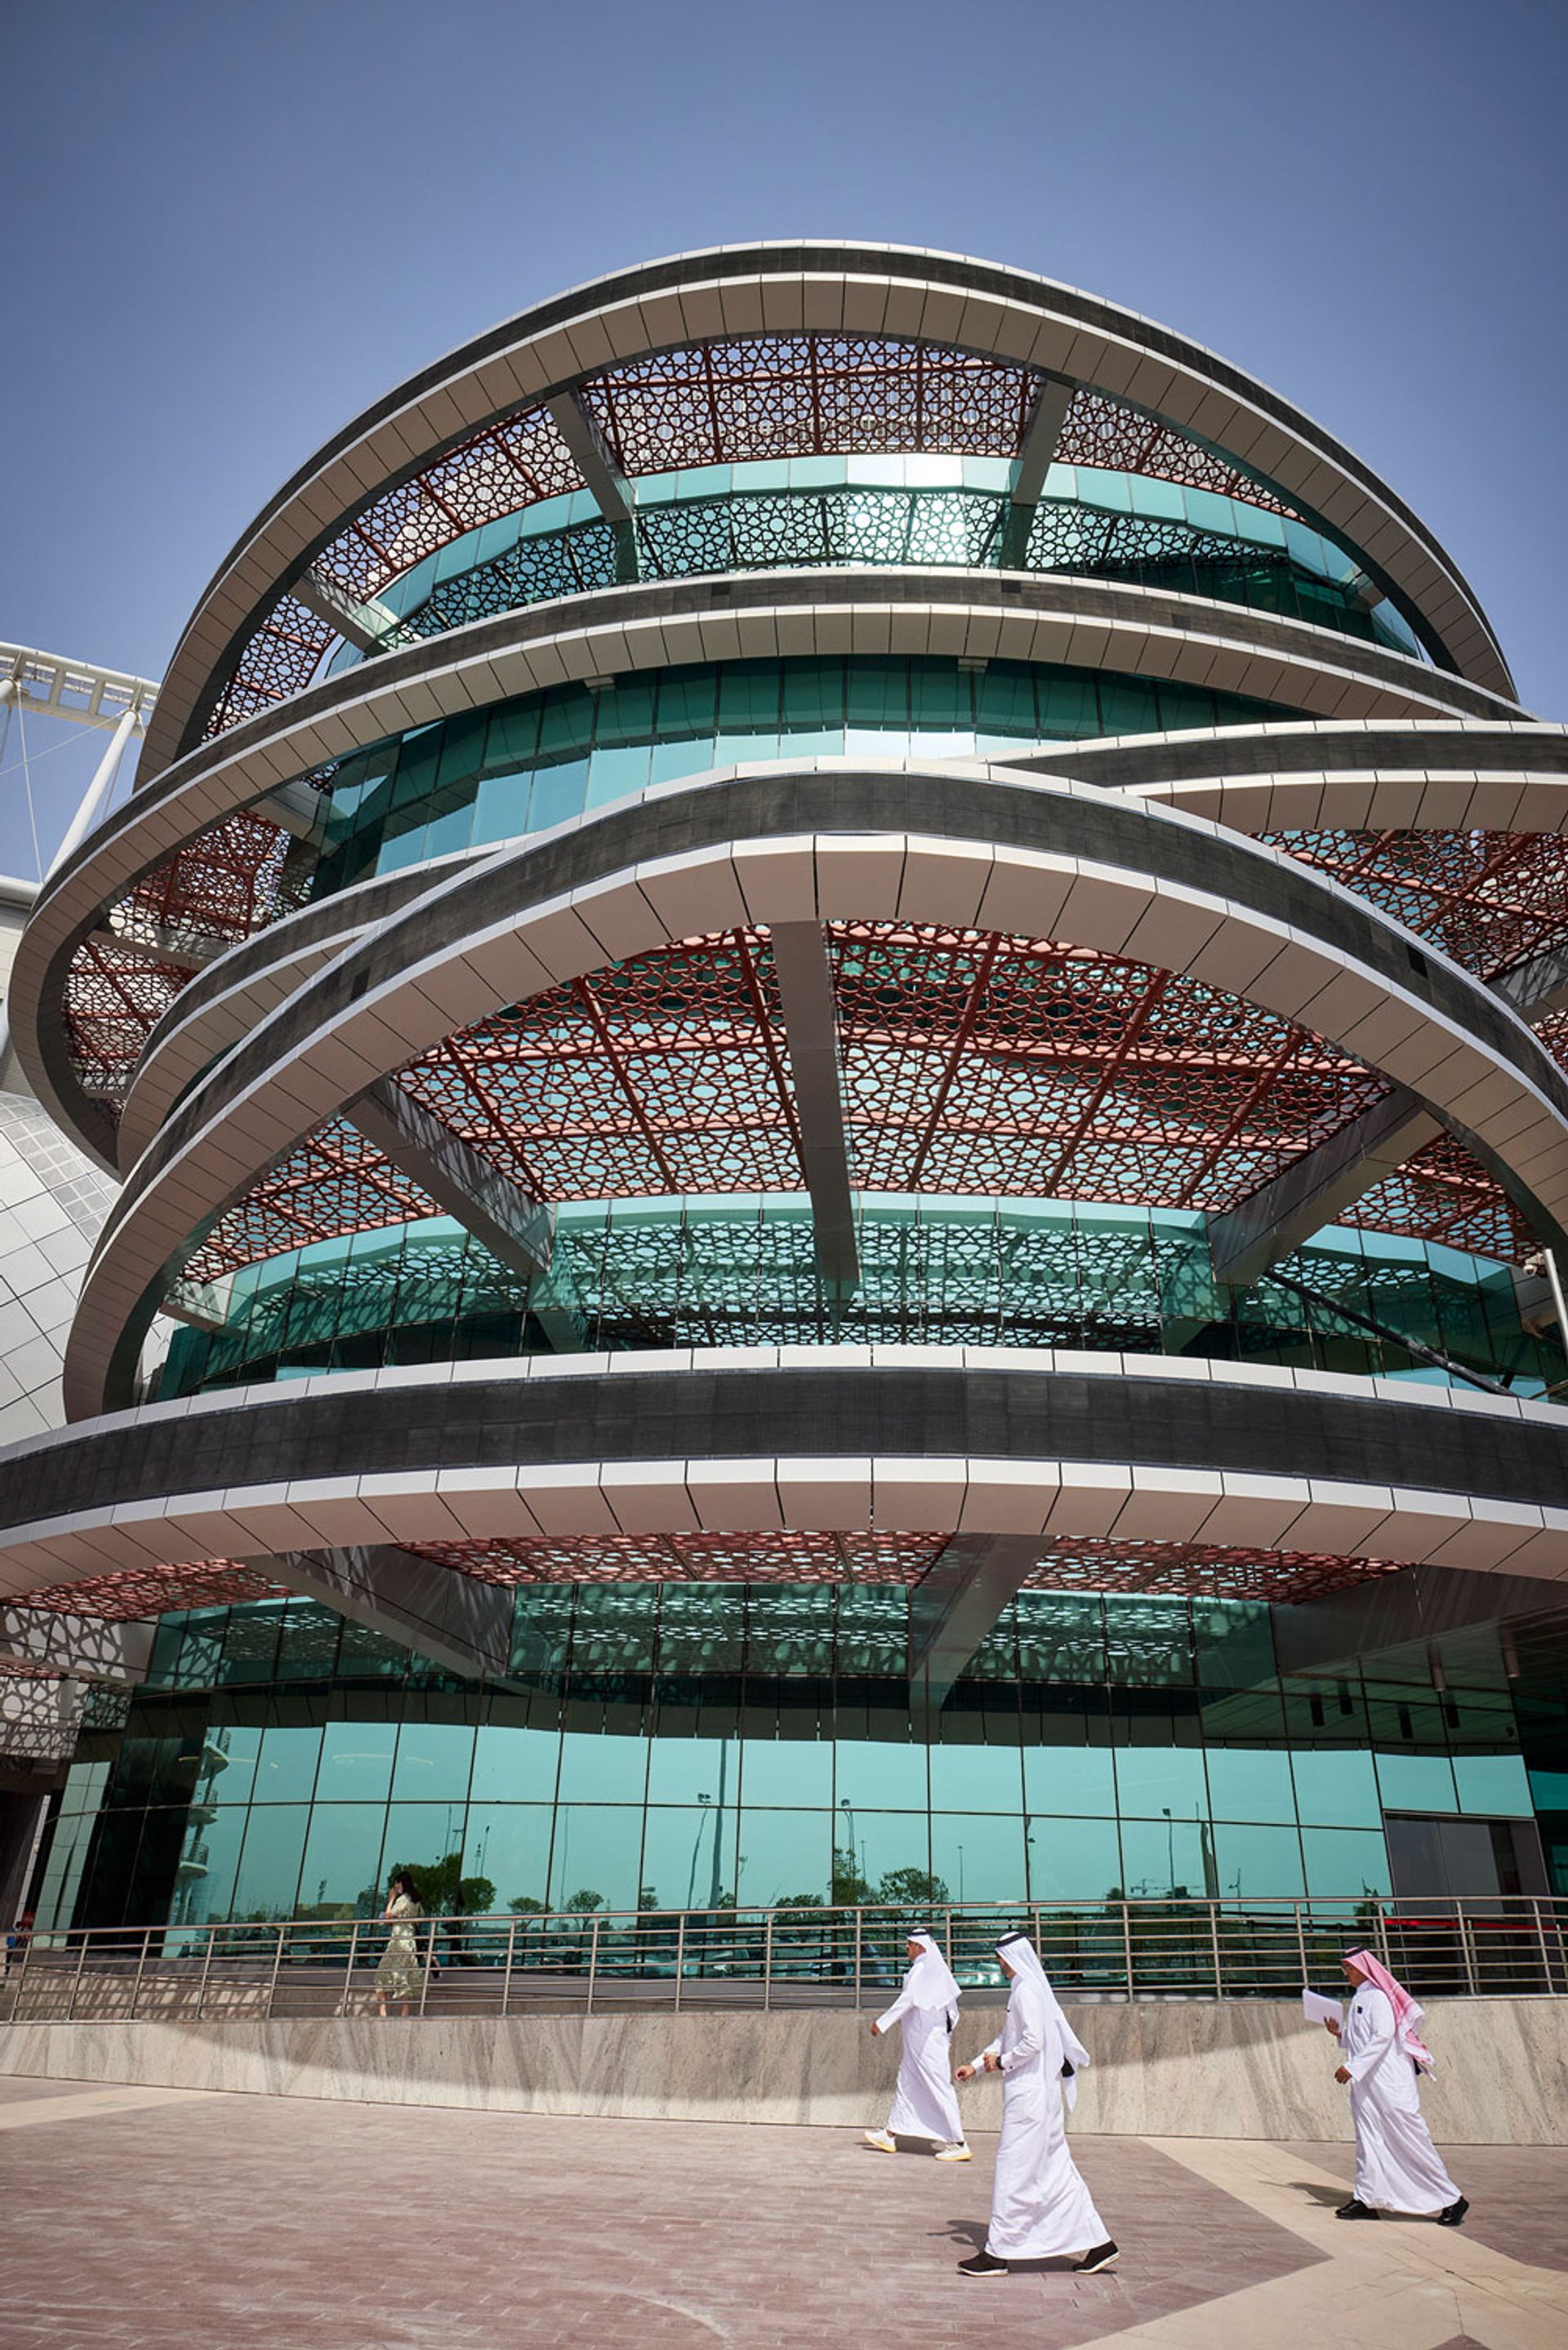 The 3-2-1 Qatar Olympic and Sports Museum opened earlier this year at the Khalifa national stadium

© David Levene



